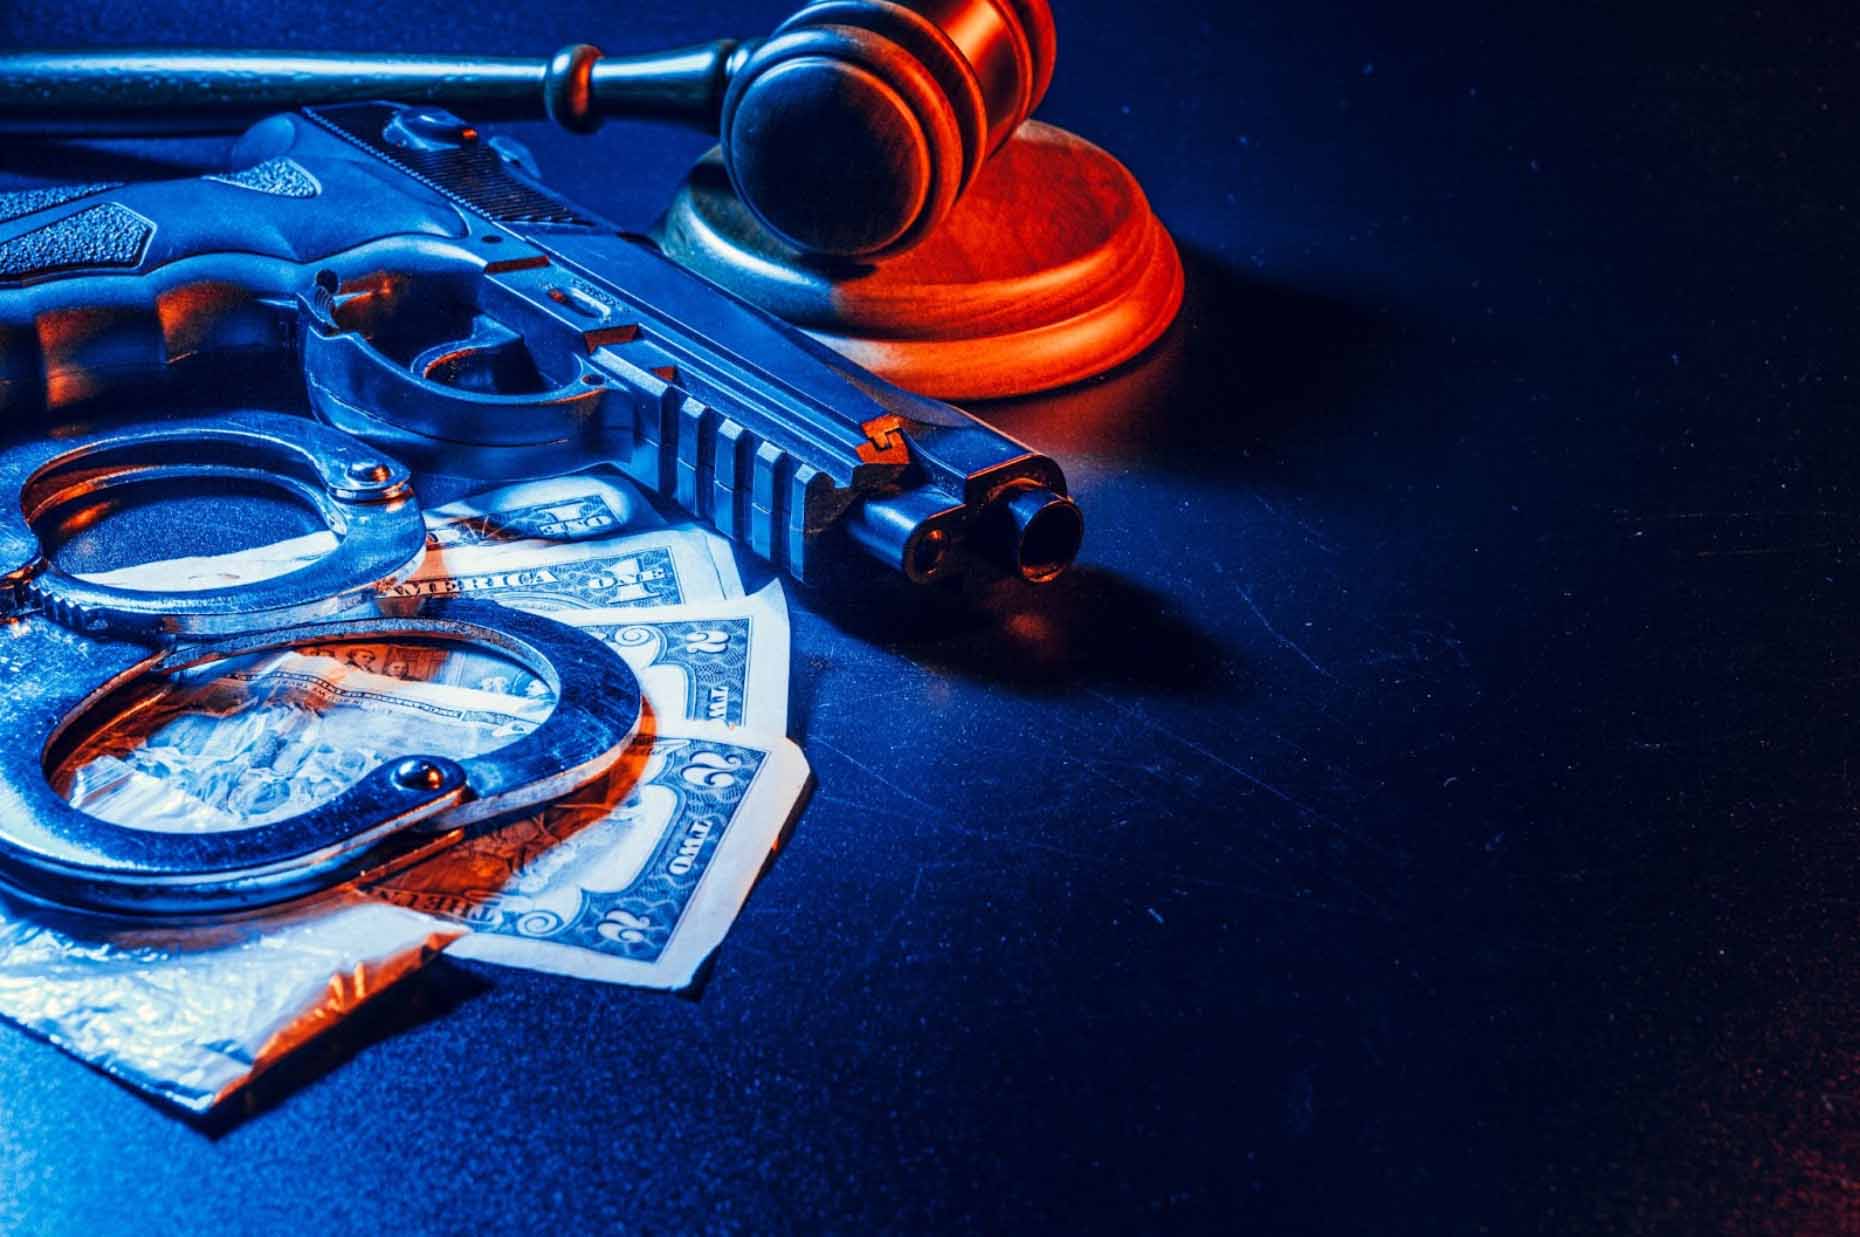 A close-up view of a gun, a judge's gavel, handcuffs, and money arranged on a table, symbolizing the intersection of law enforcement and legal judgment.